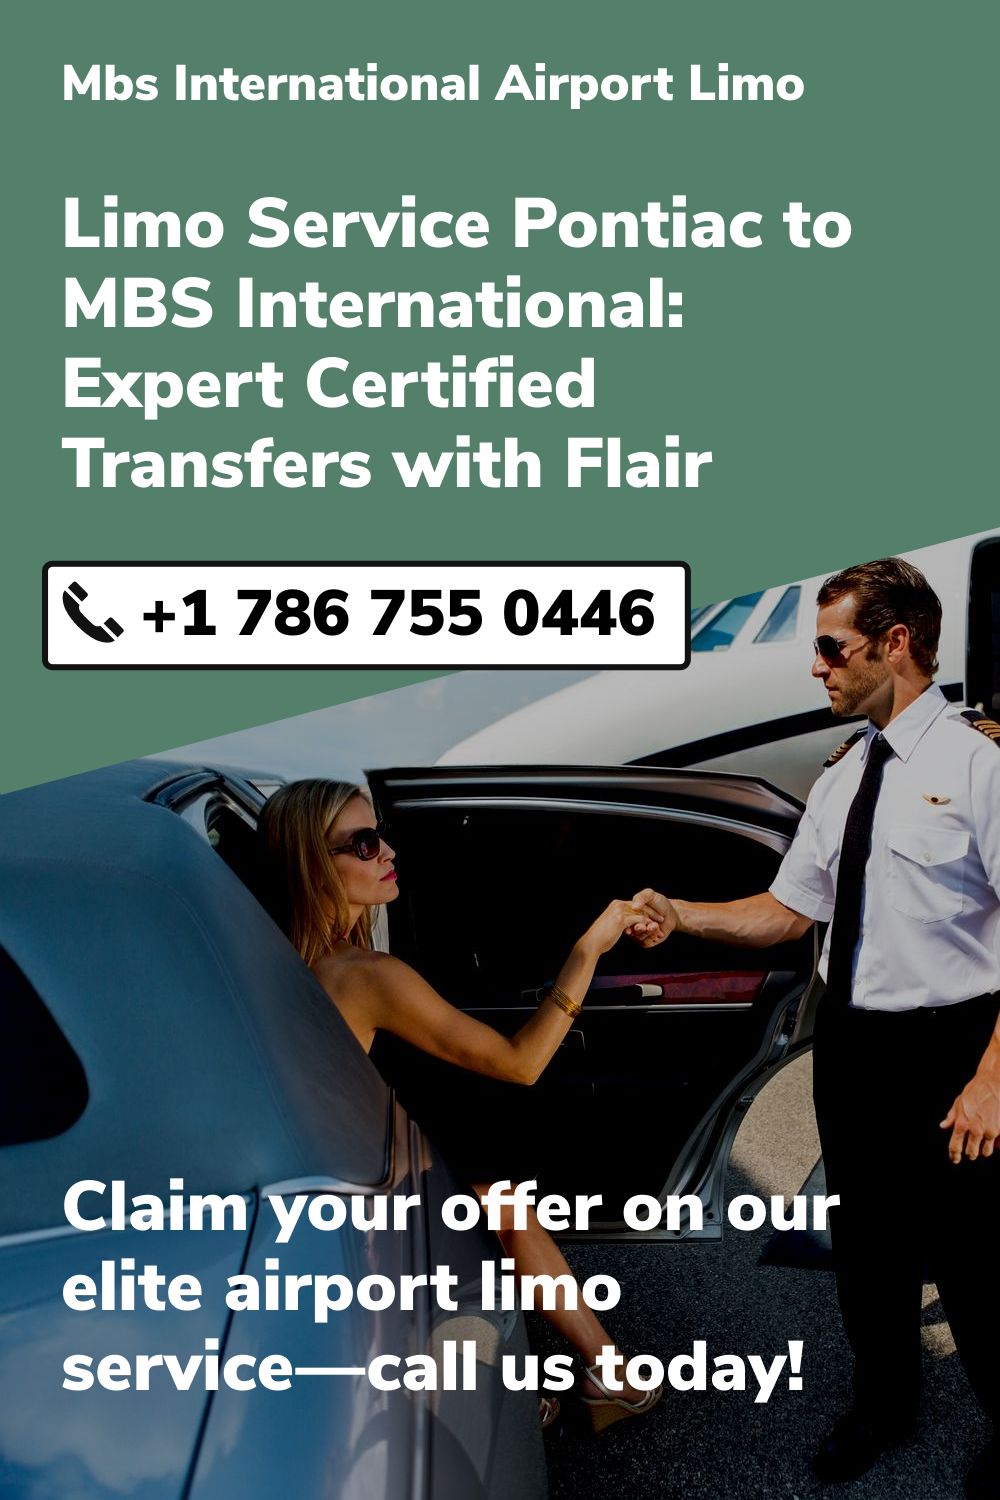 Mbs International Airport Limo